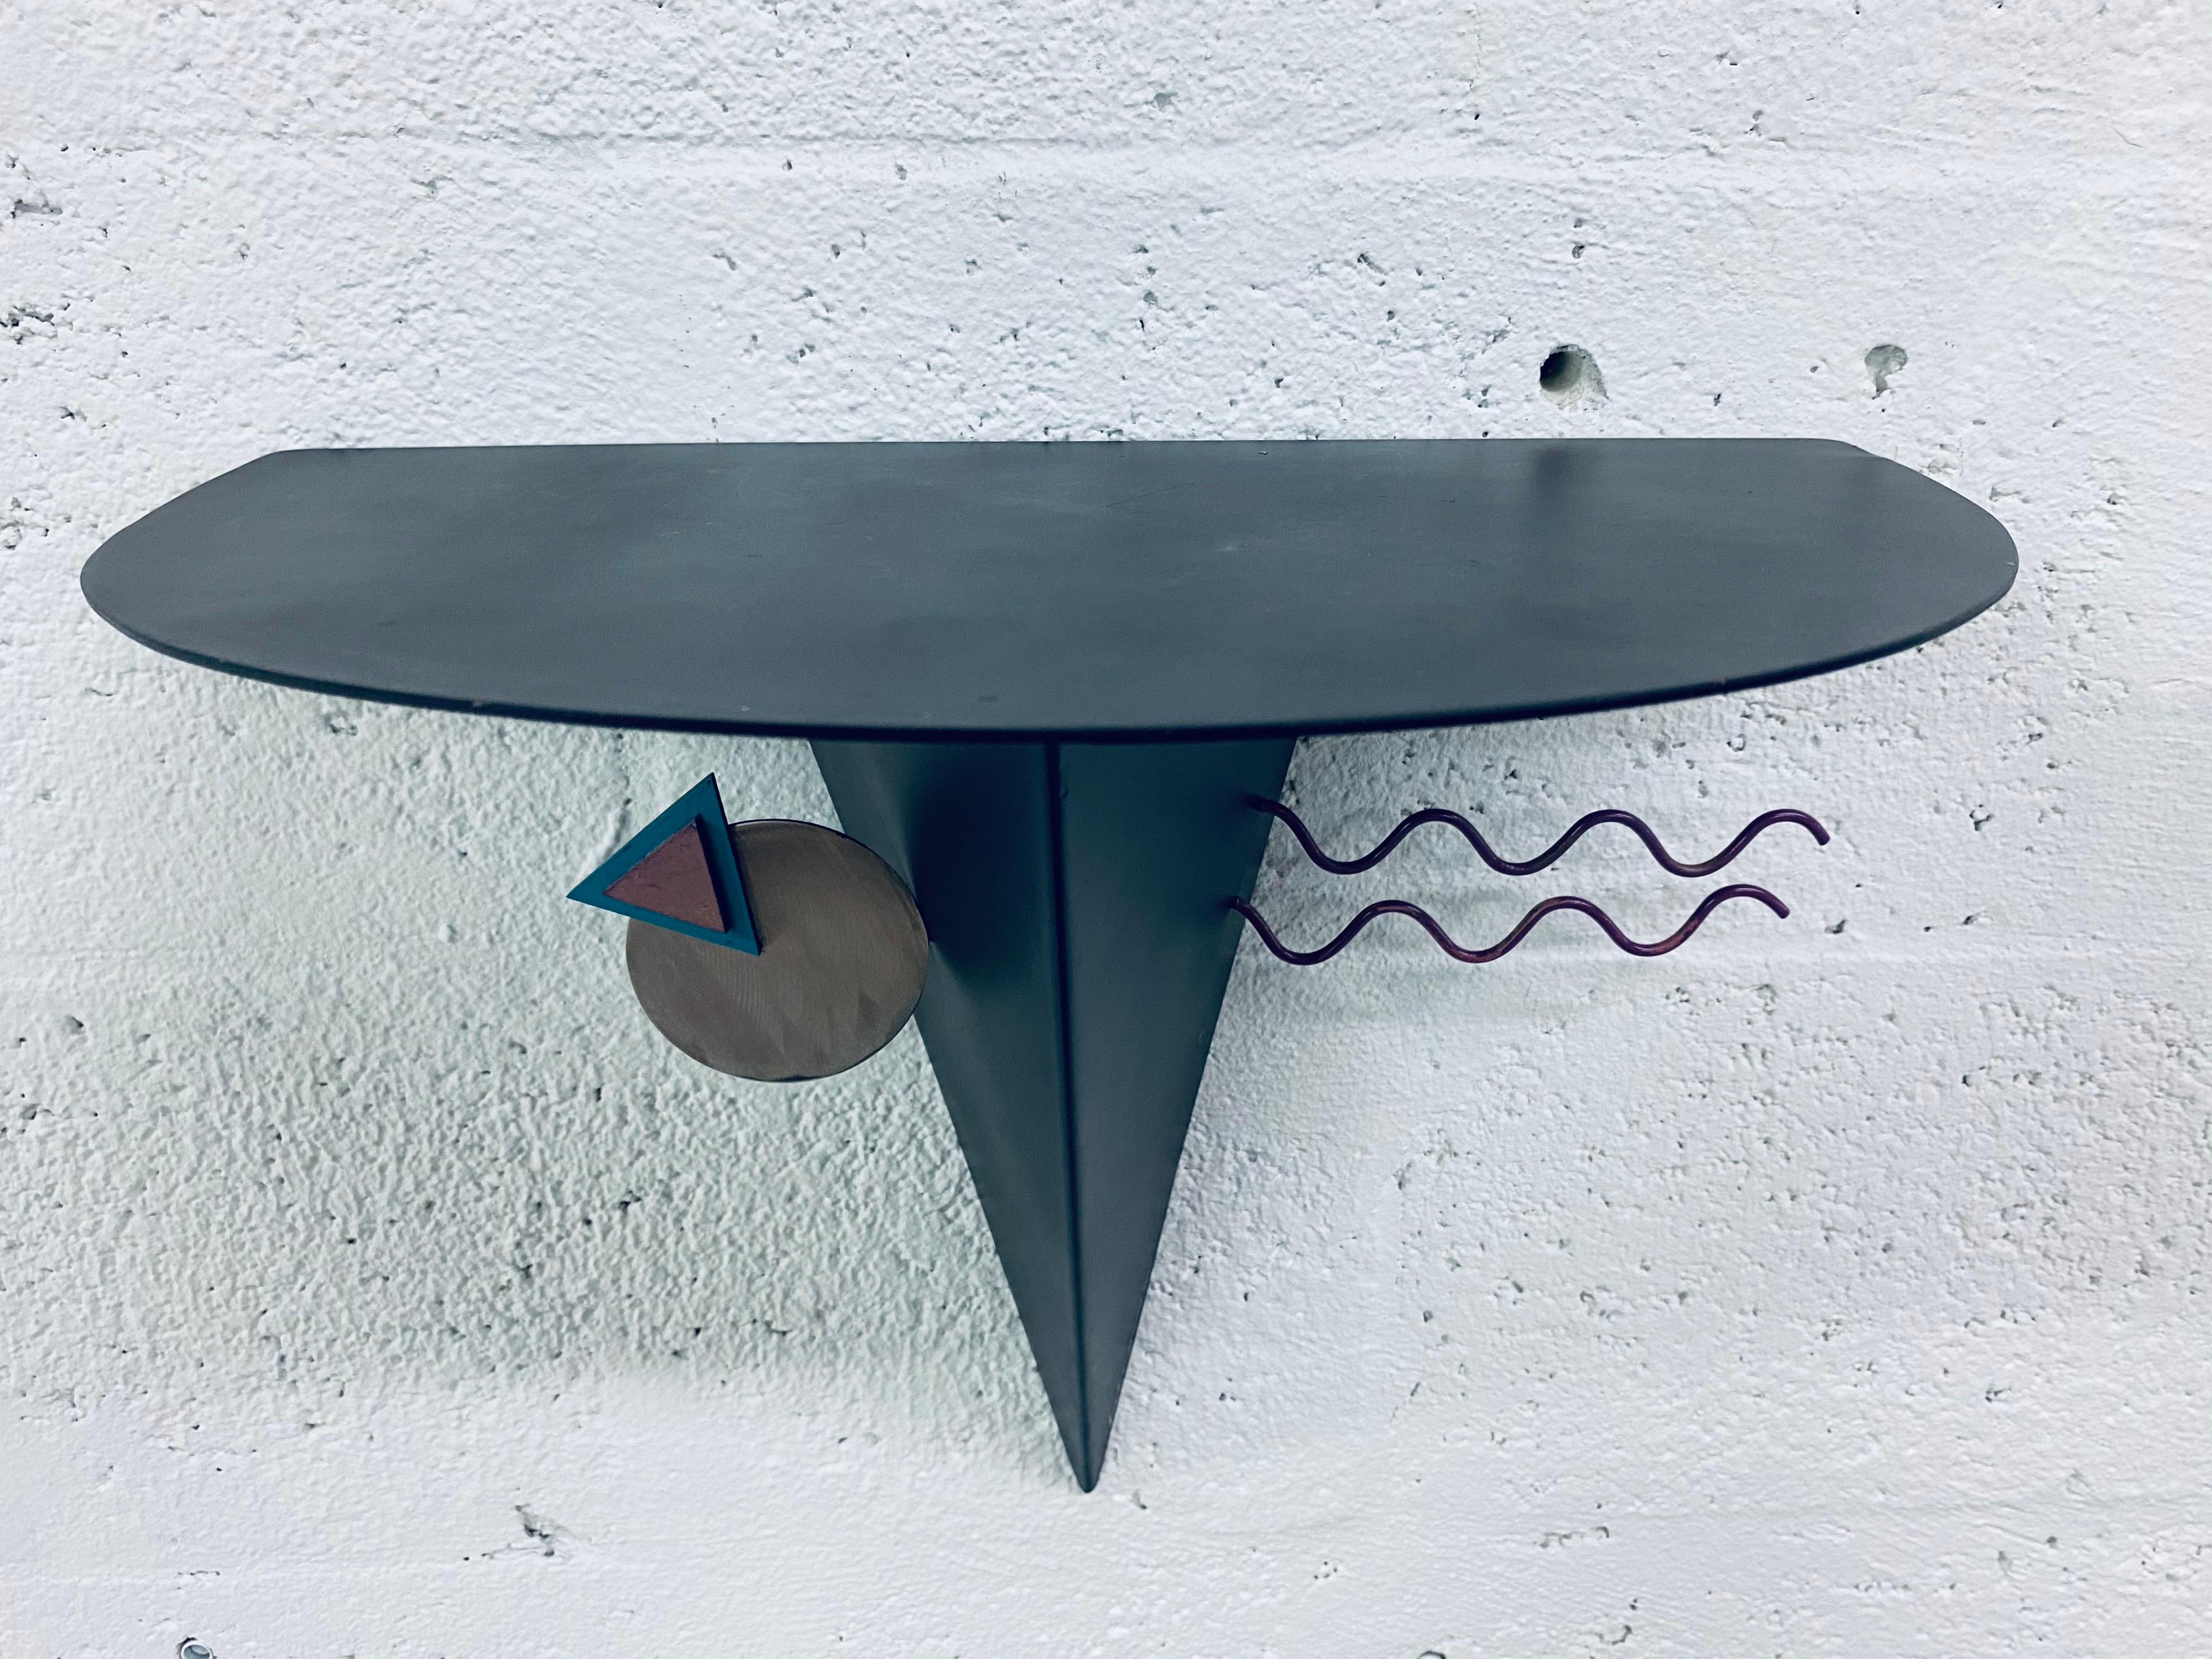 Postmodern Memphis Style Wall Shelf With Half Circle Top (2 of 3) 2